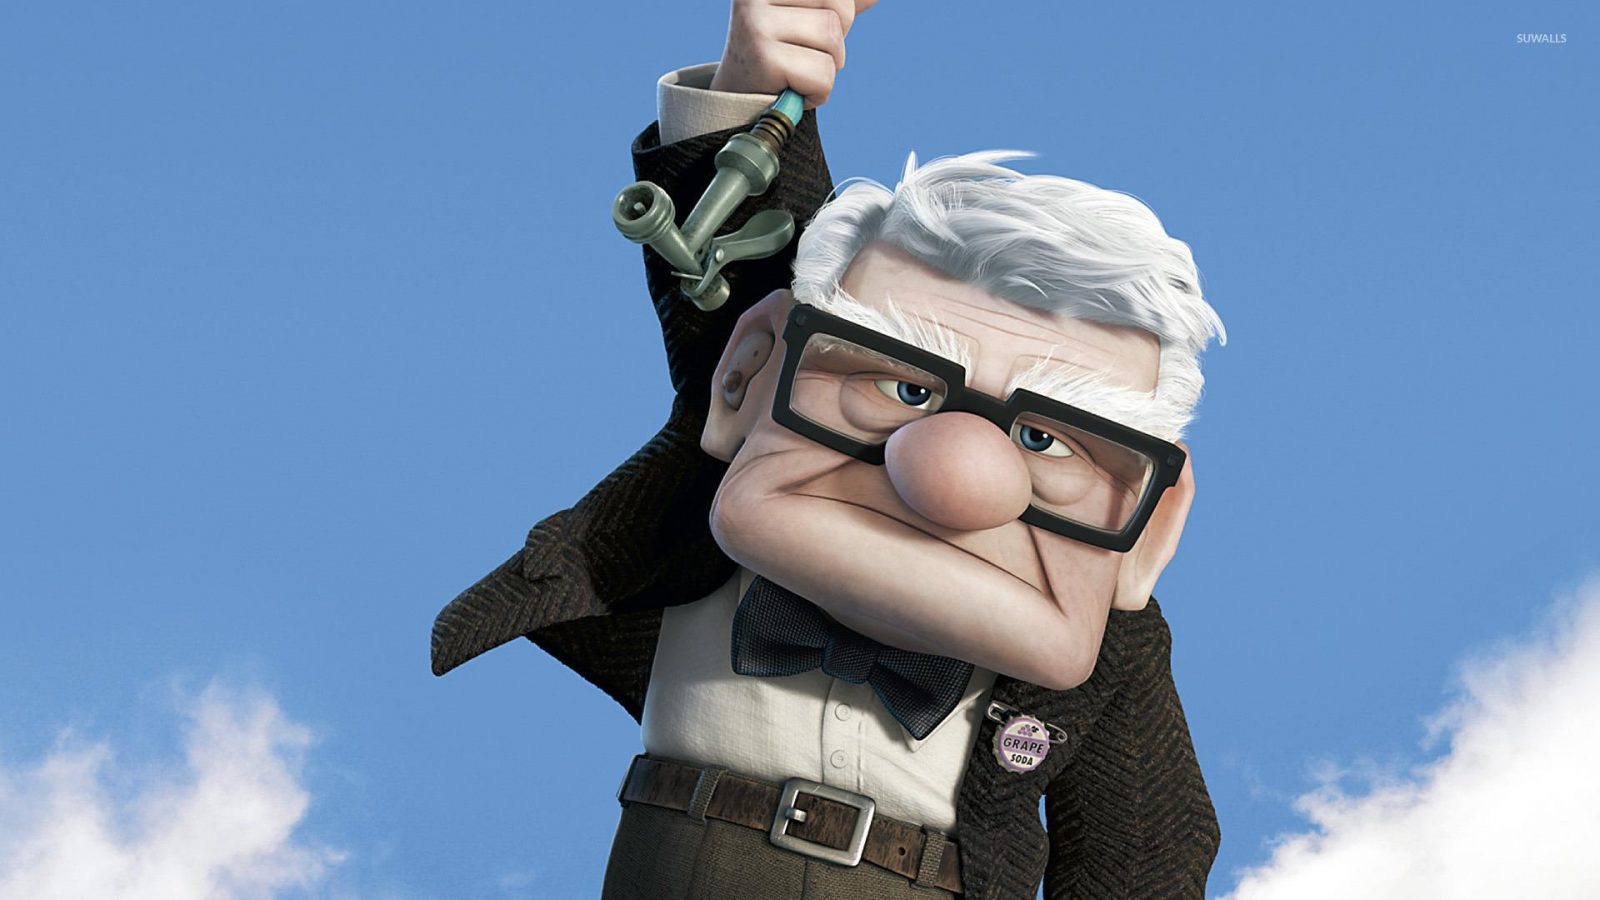 Sort Some Pixar Characters into Hogwarts Houses to Find Out Which House You Absolutely Don’t Belong in Carl Fredricksen From Up Movie